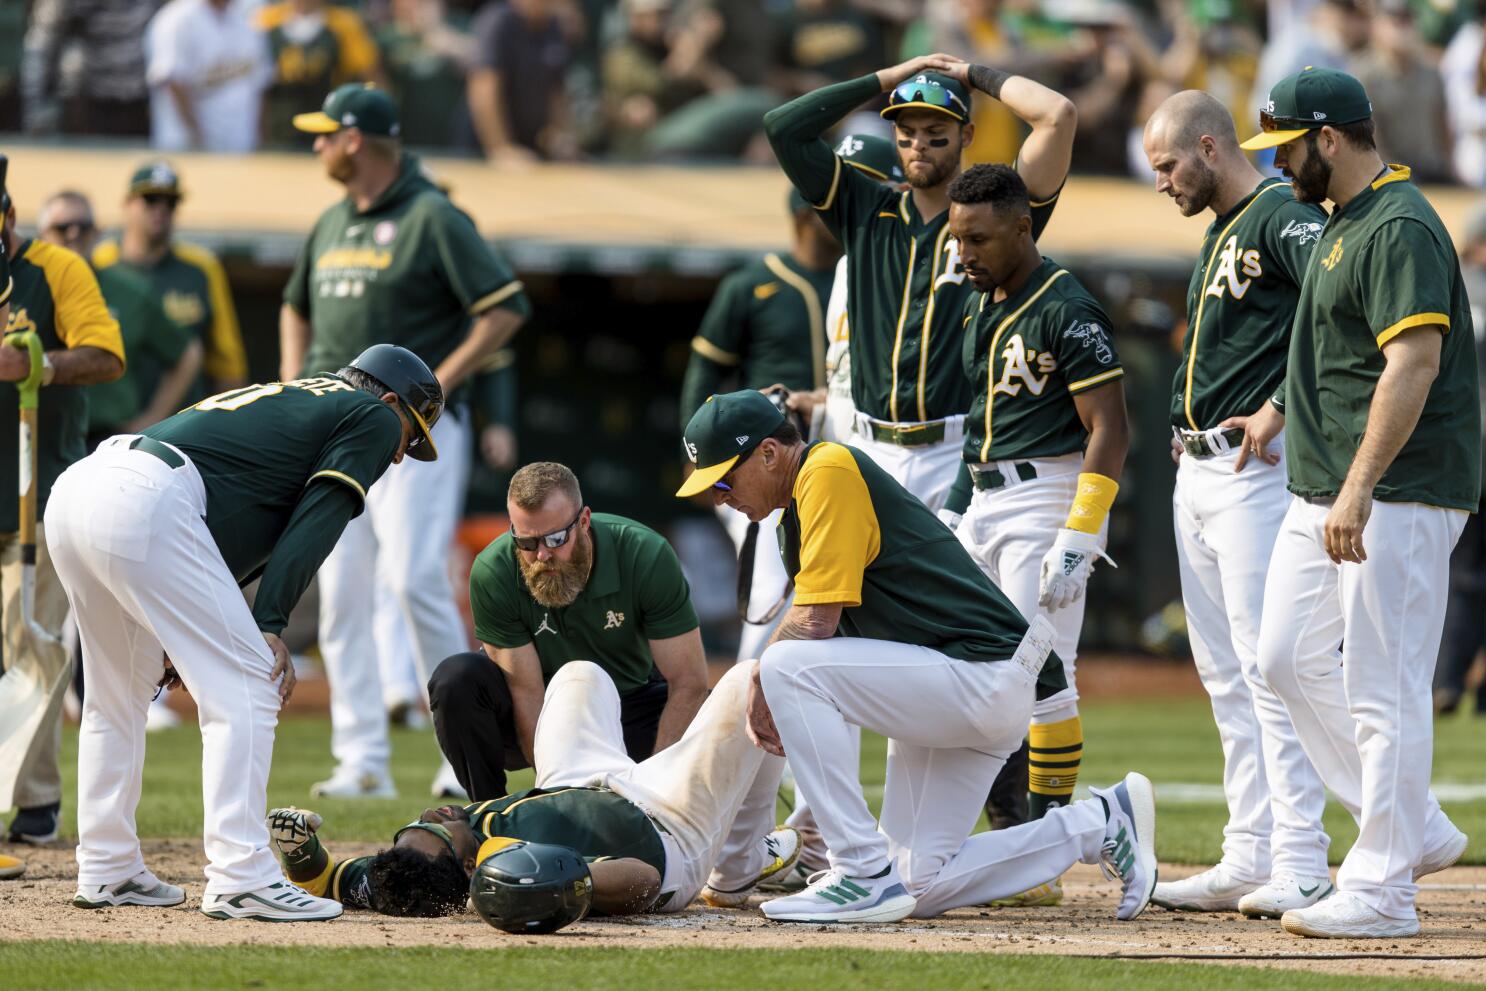 Marte's double in 9th lifts A's 2-1, stalls Astros - The San Diego